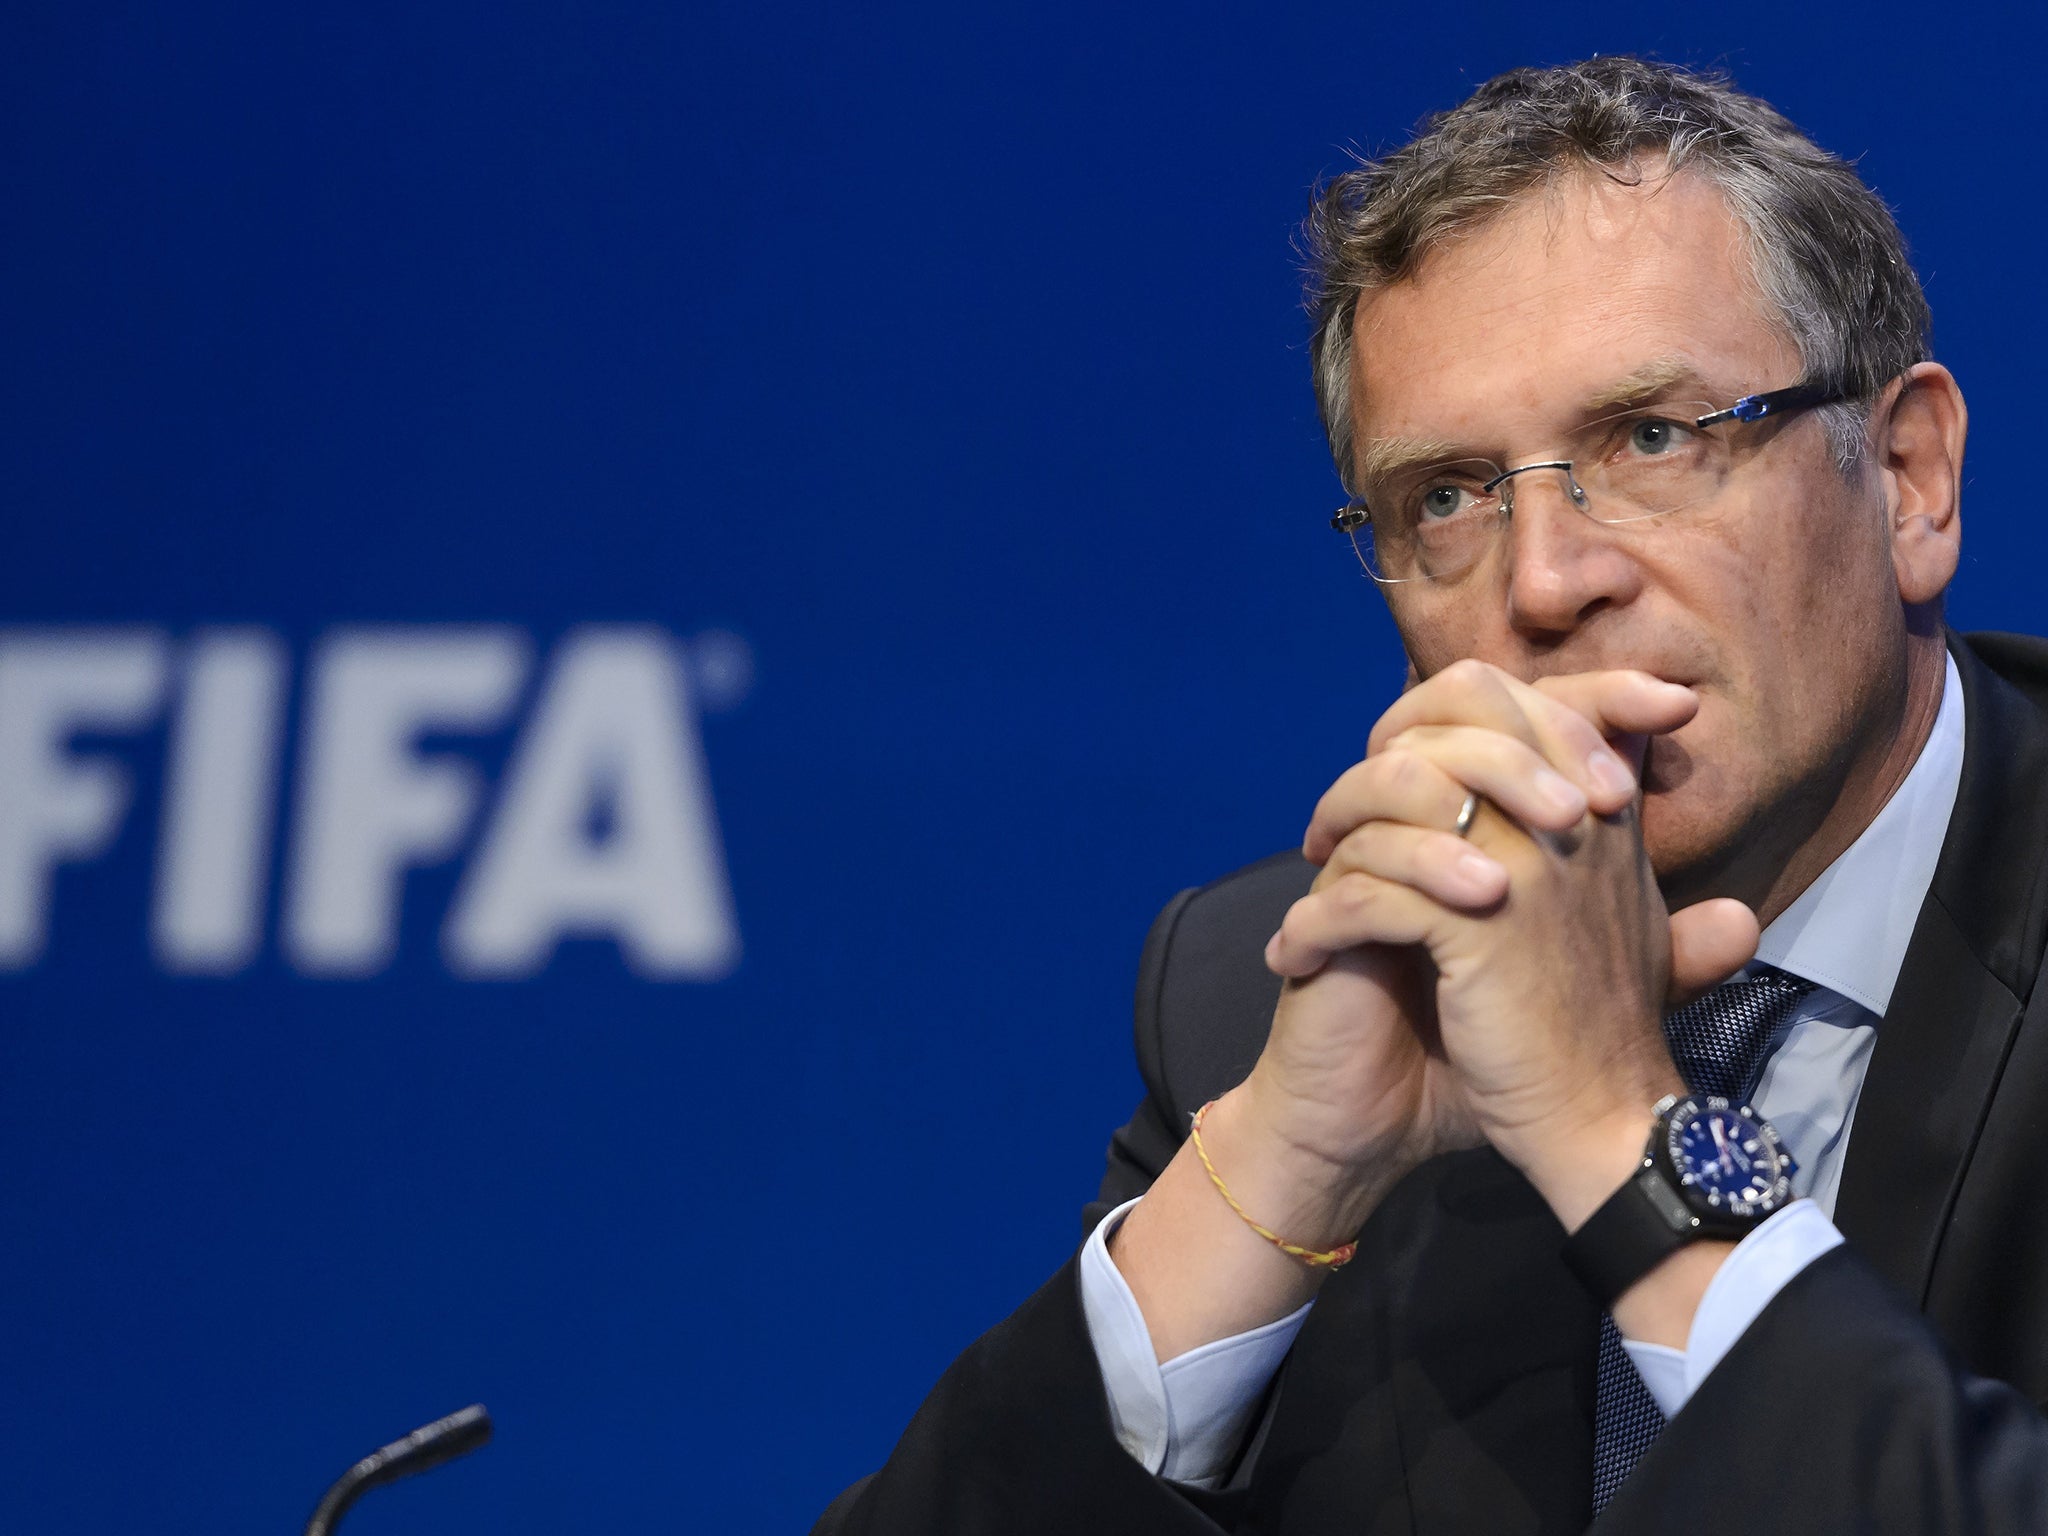 Jérôme Valcke has been accused of agreeing to help sell Brazil 2014 World Cup tickets on the black market